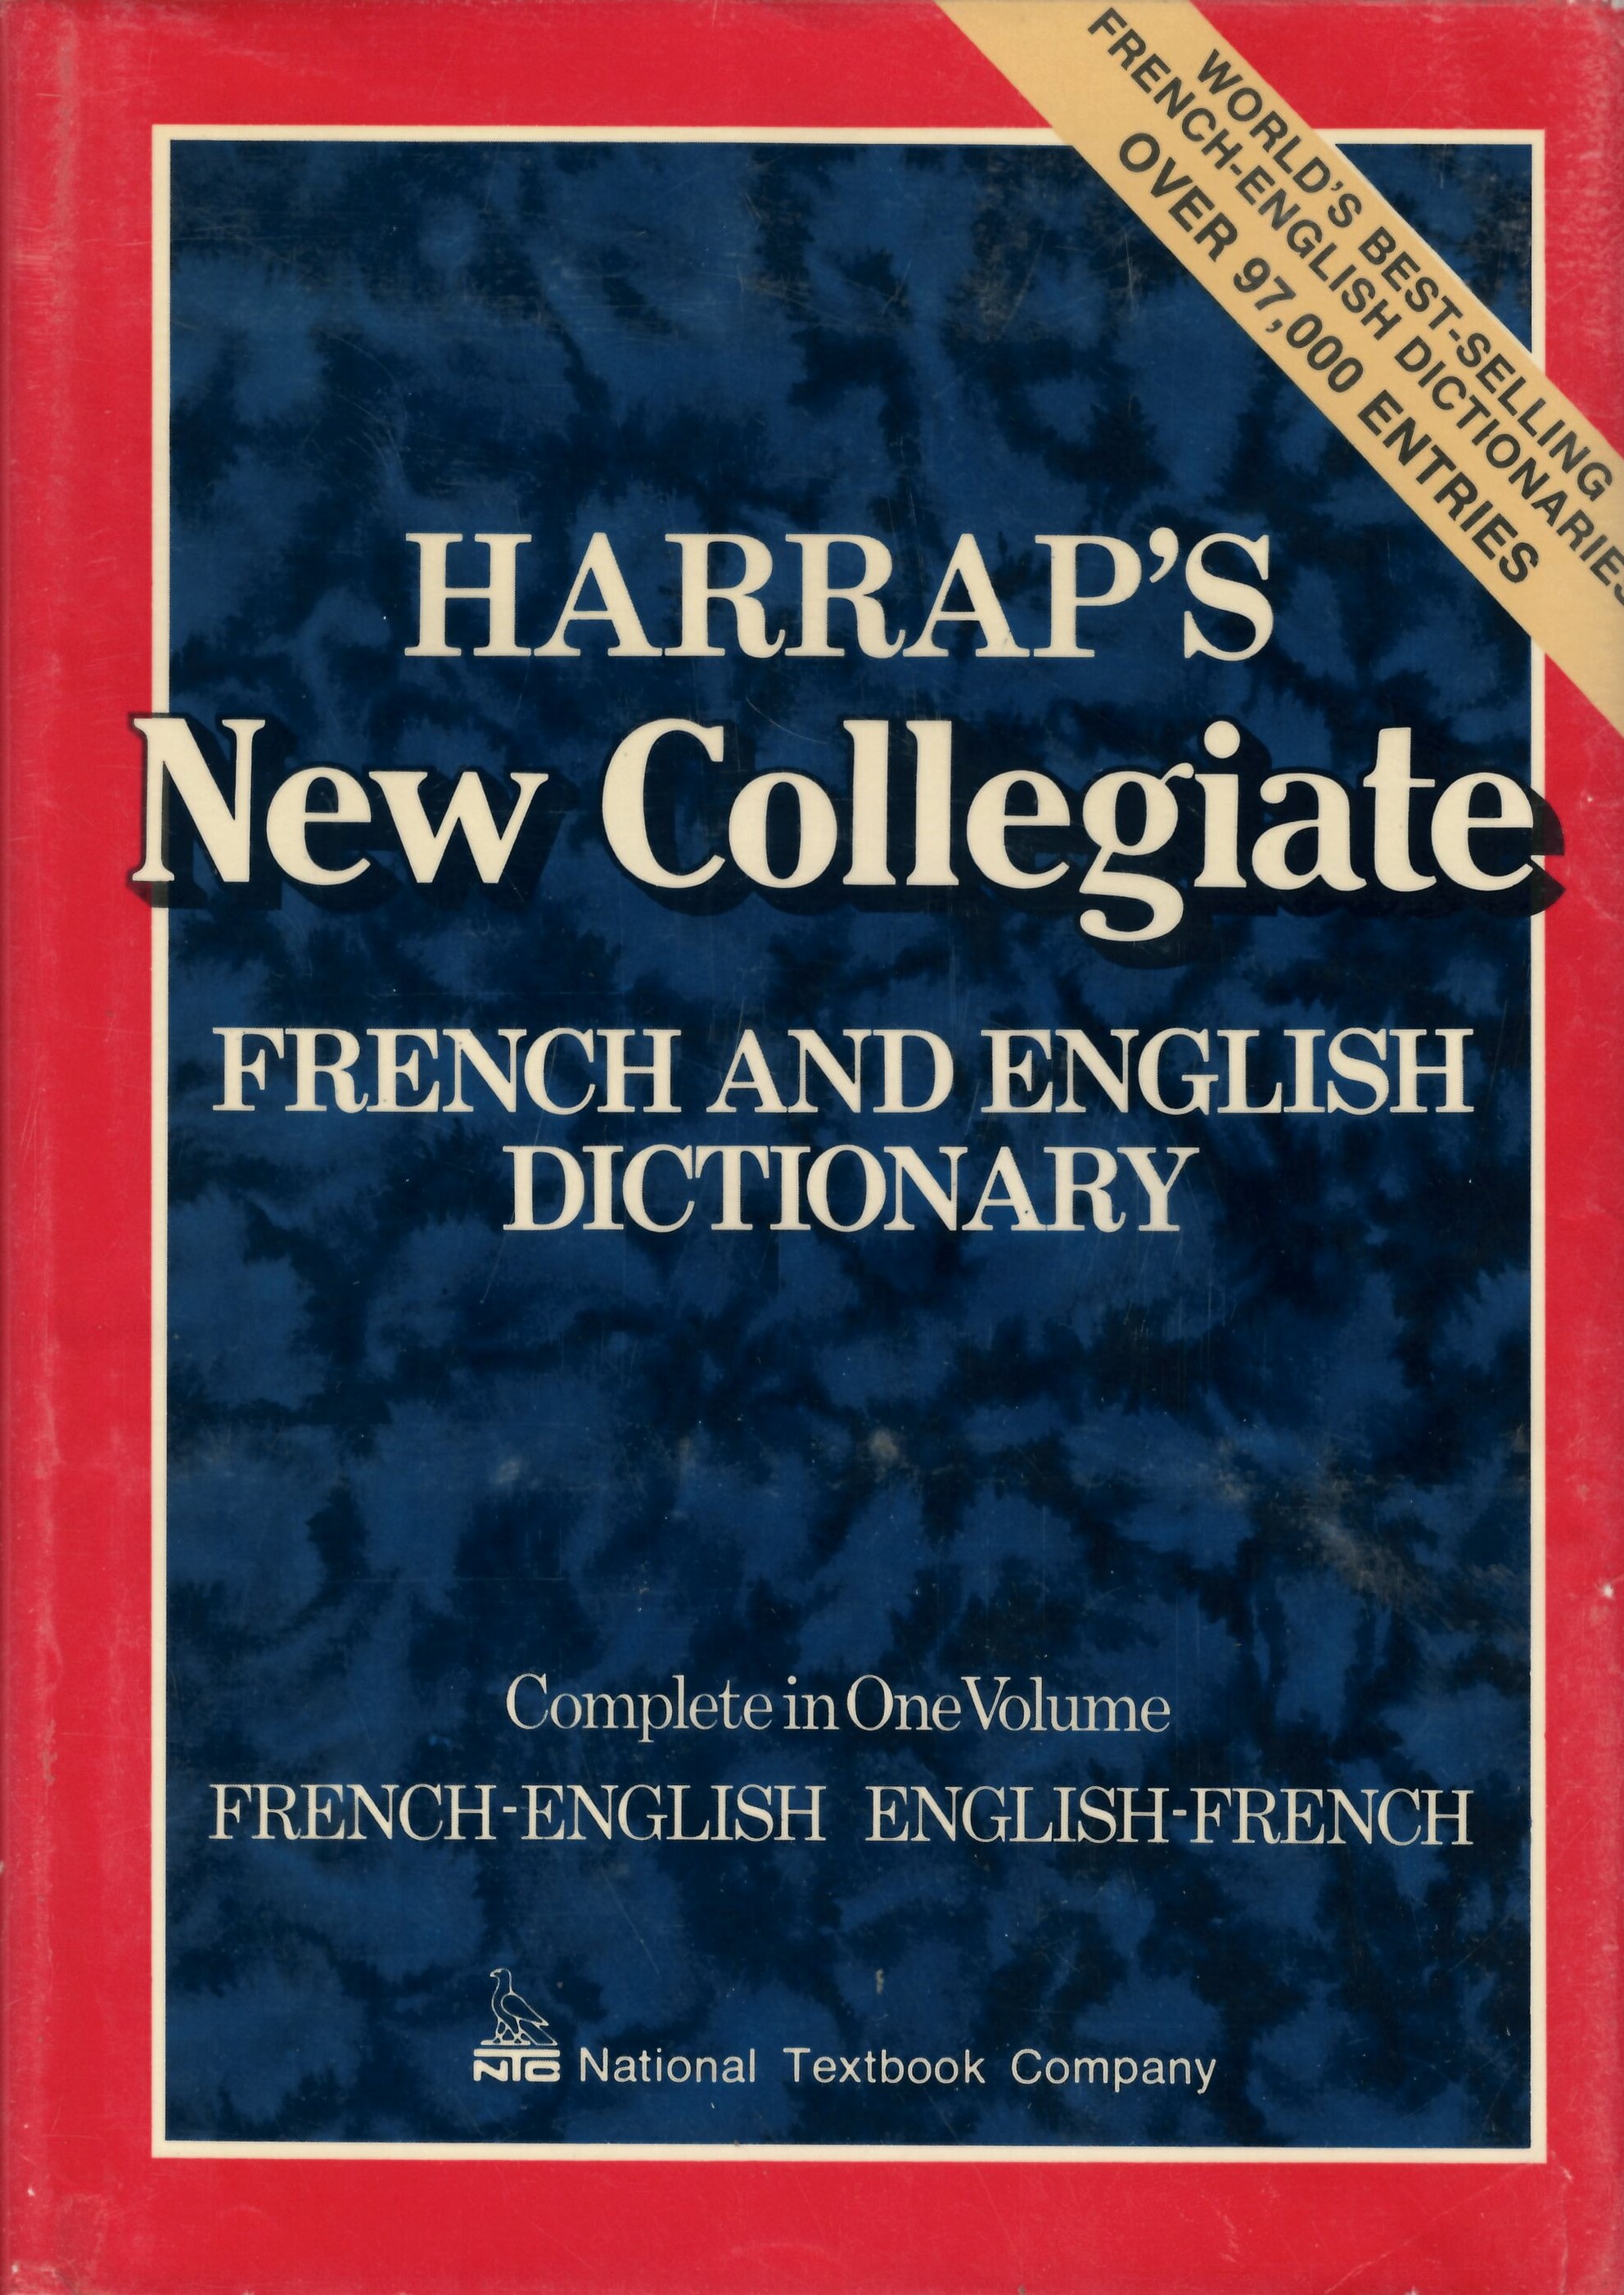 Harrap's new collegiate French and English dictionary: French-English   English-French complete in one volume /